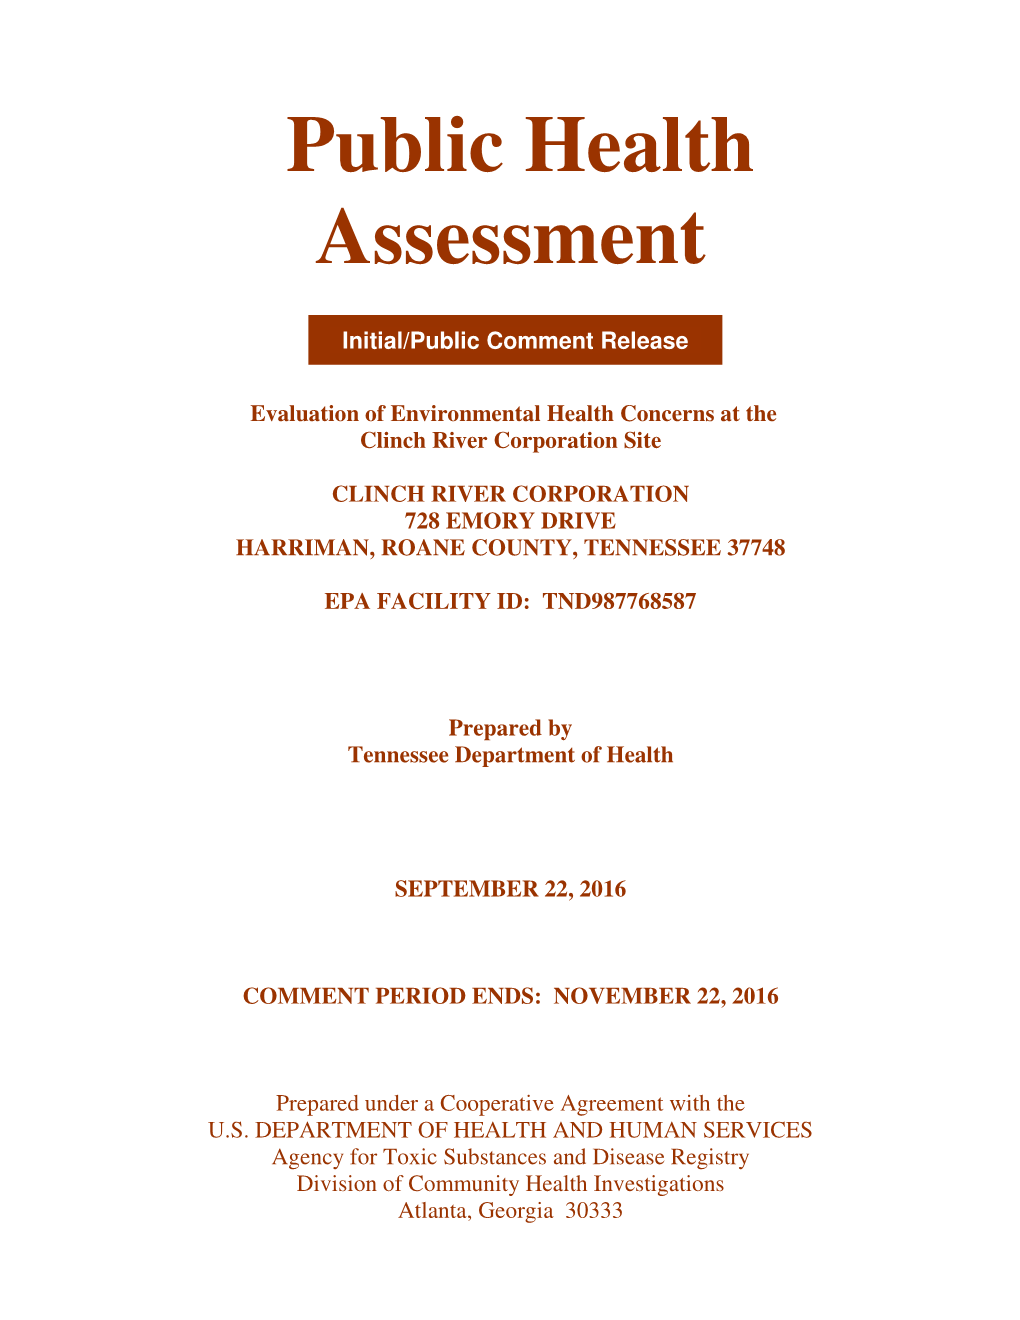 Evaluation of Environmental Health Concerns at the Clinch River Corporation Site